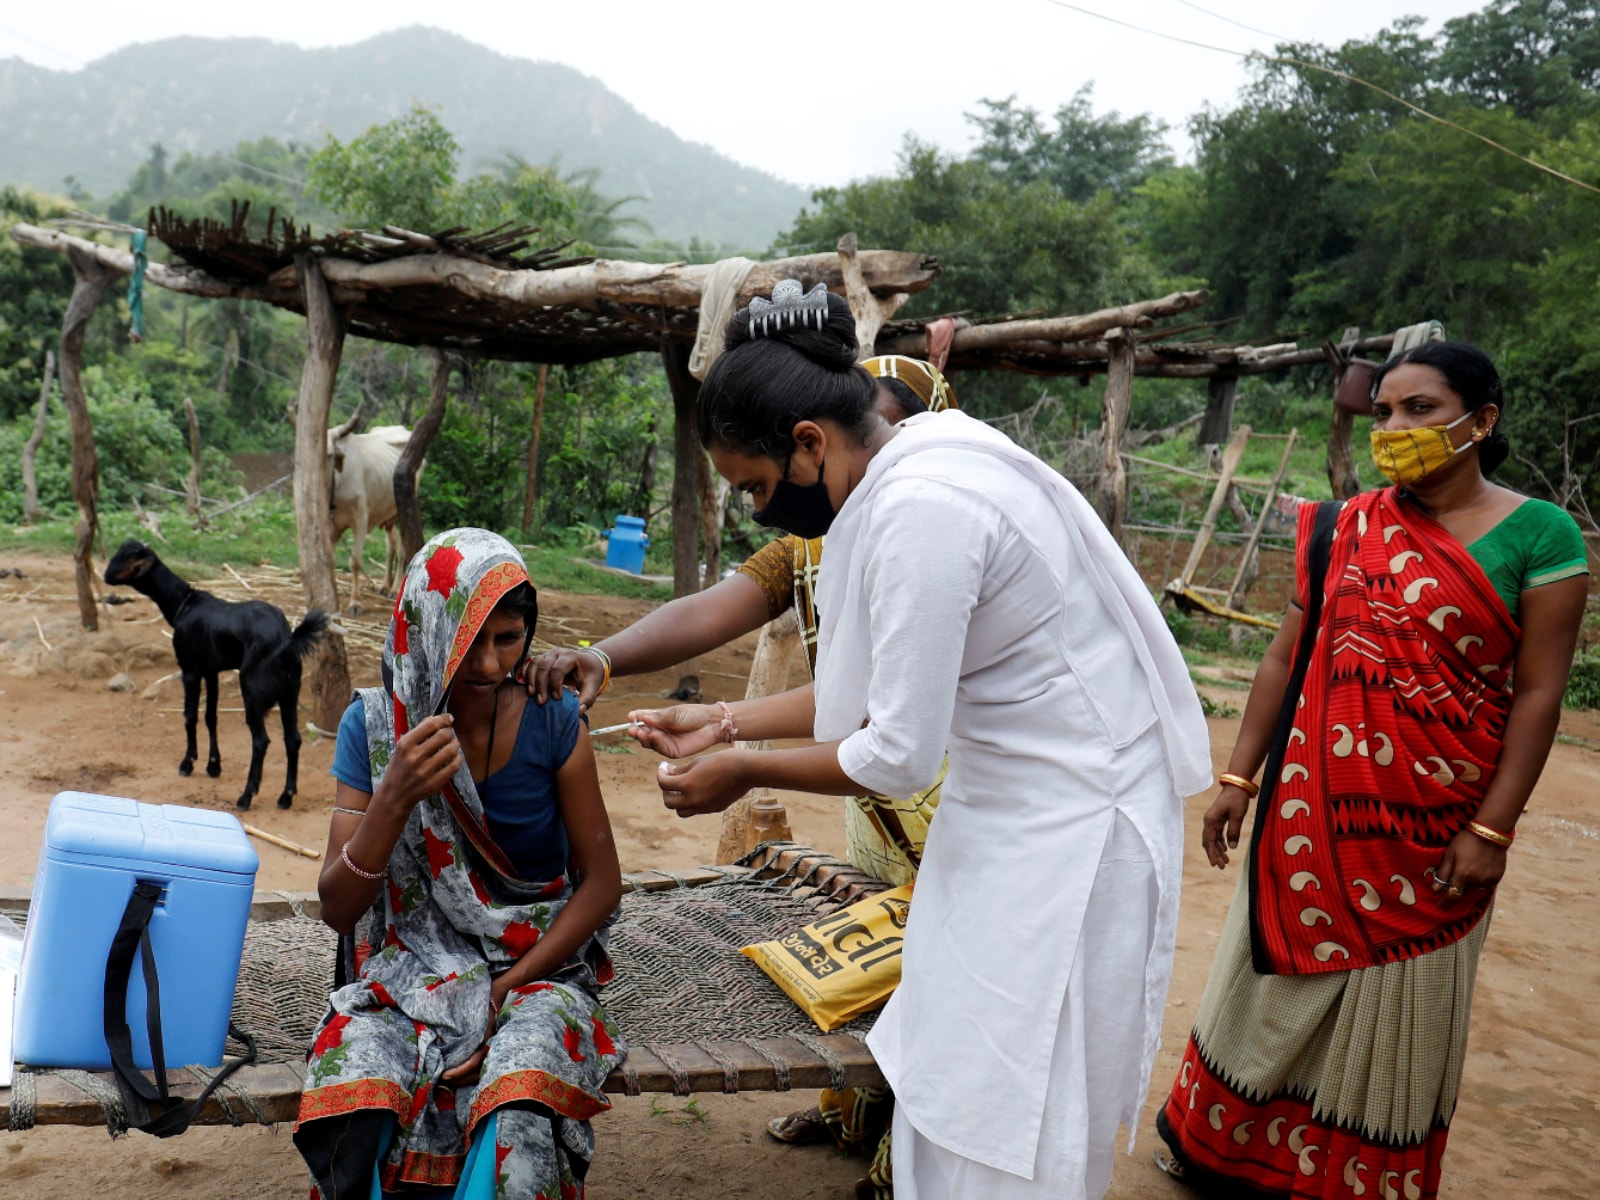 India's Vaccination Drive Takes a Rural Turn, More than 60% Inoculations in Villages: Report